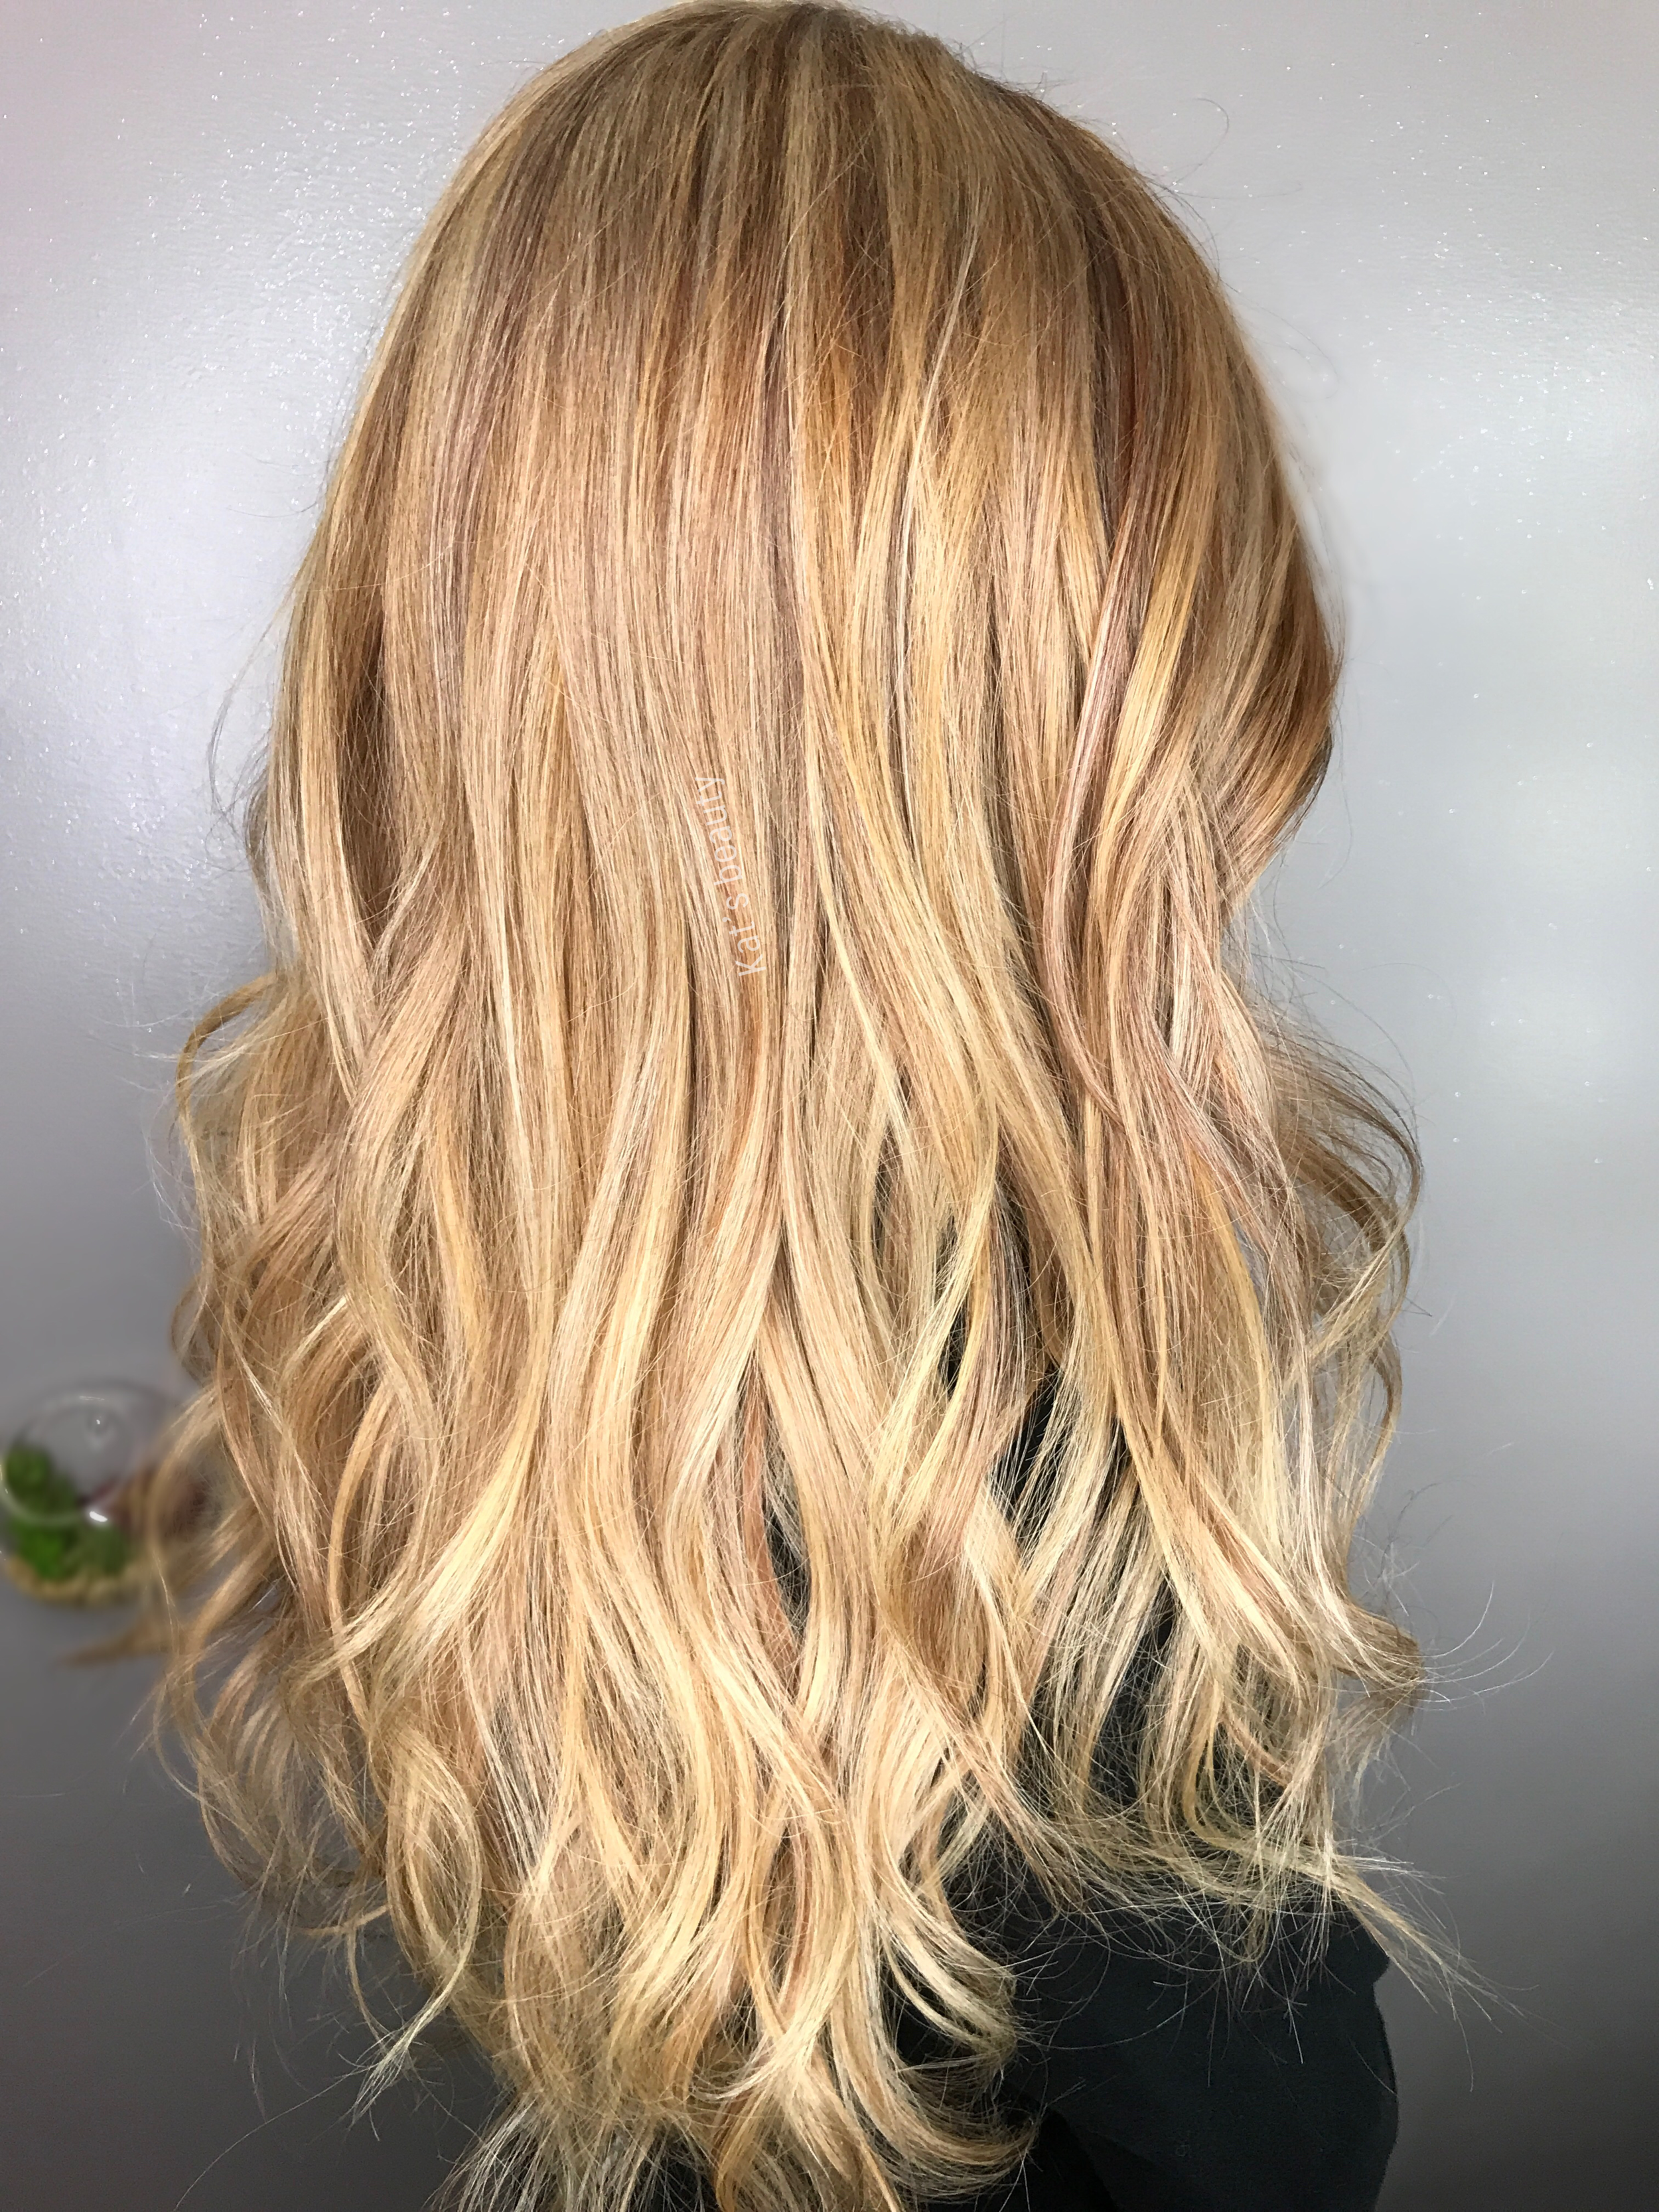 Kathryn Di Gioia - Hair Stylist - Los Angeles - Highlights.PNG